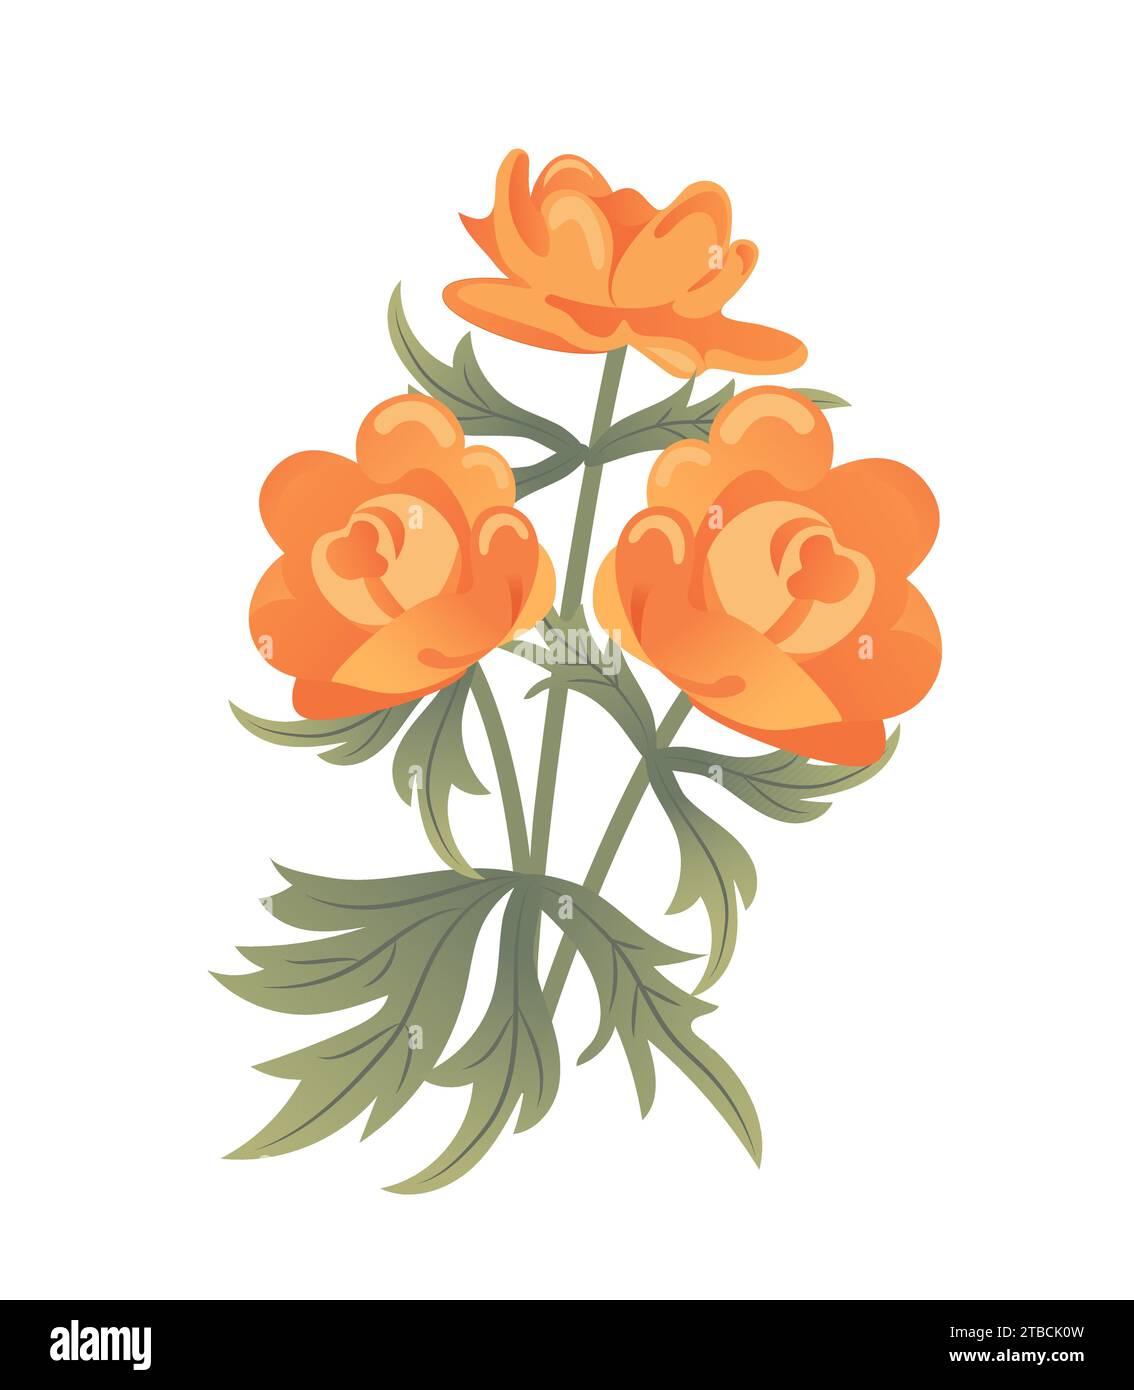 Trollius europaeus, asiaticus, globe yellow flower alpine meadows. Botanical illustration in flat style, plant. For Easter stickers, posters, postcard Stock Vector